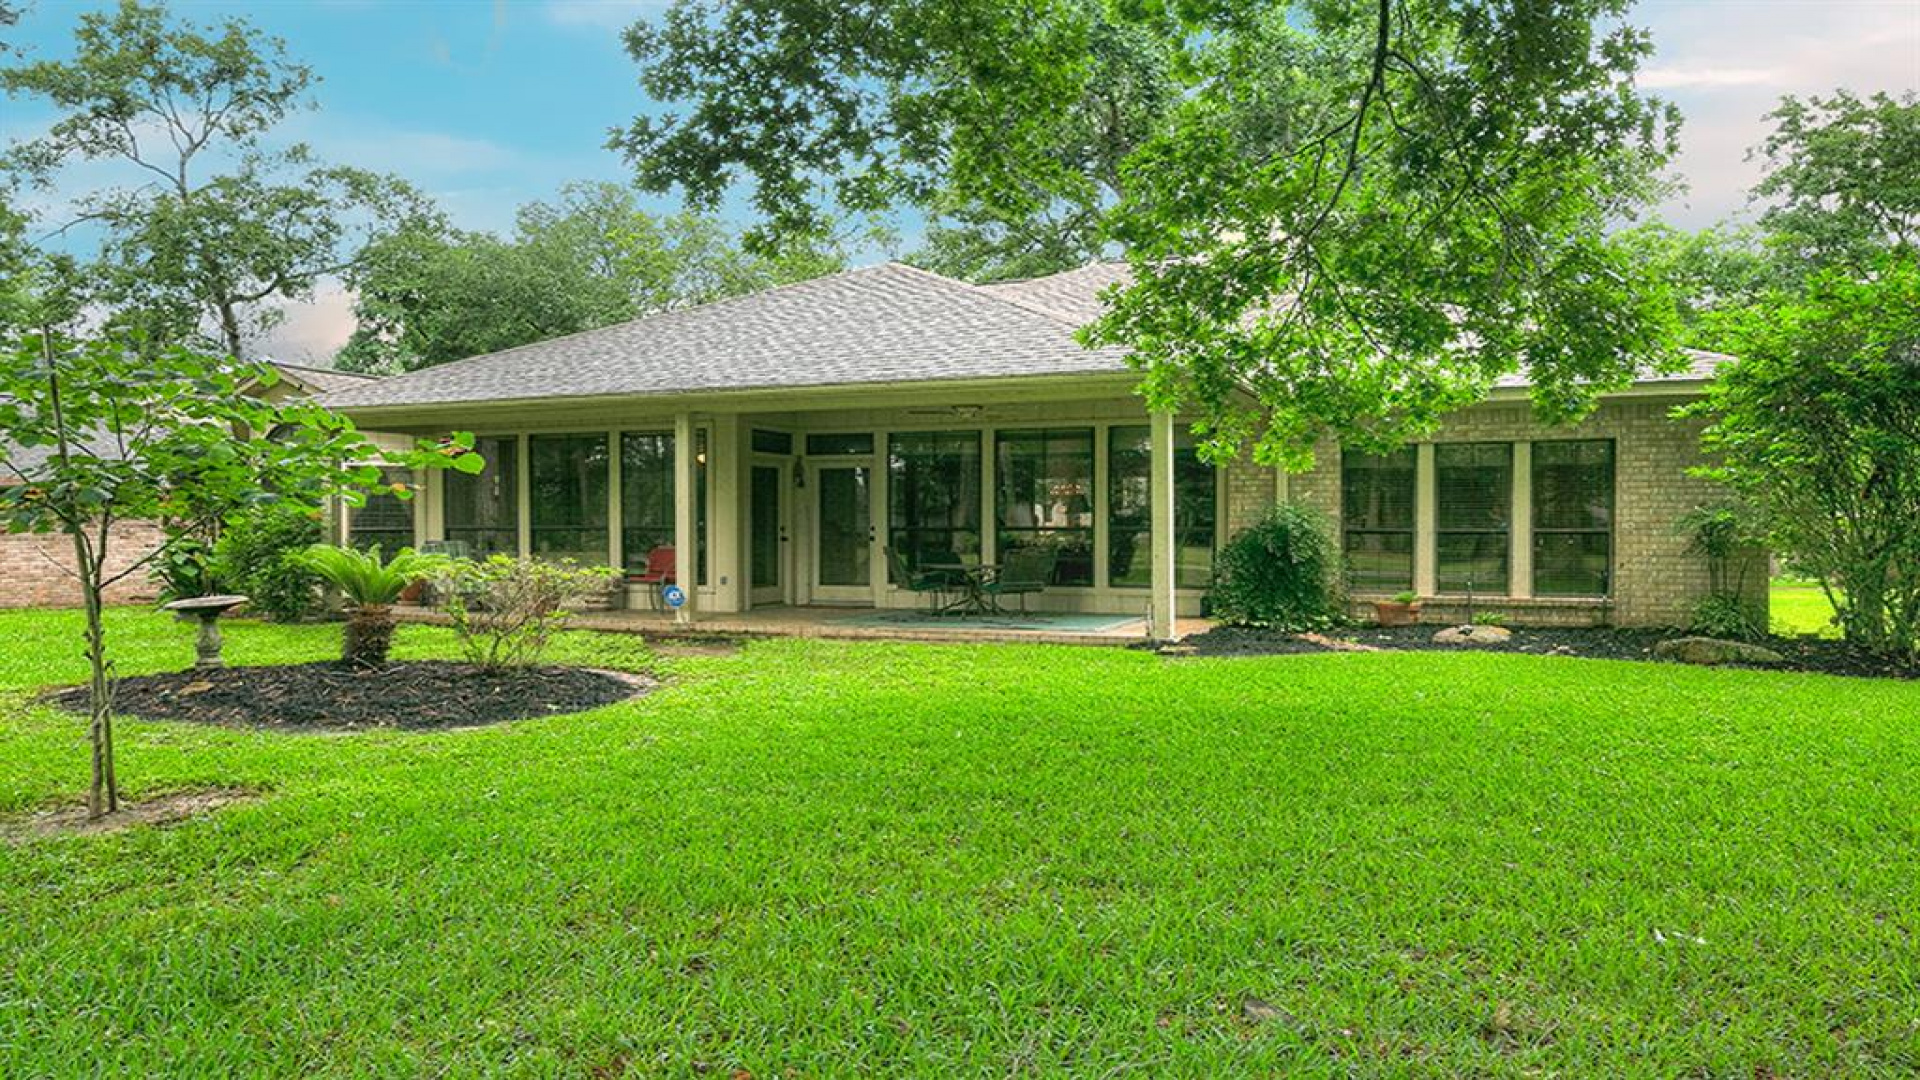 Lake Island Drive 3139, Texas 77356, 3 Bedrooms Bedrooms, ,3 BathroomsBathrooms,Single Family,For Sale,1010